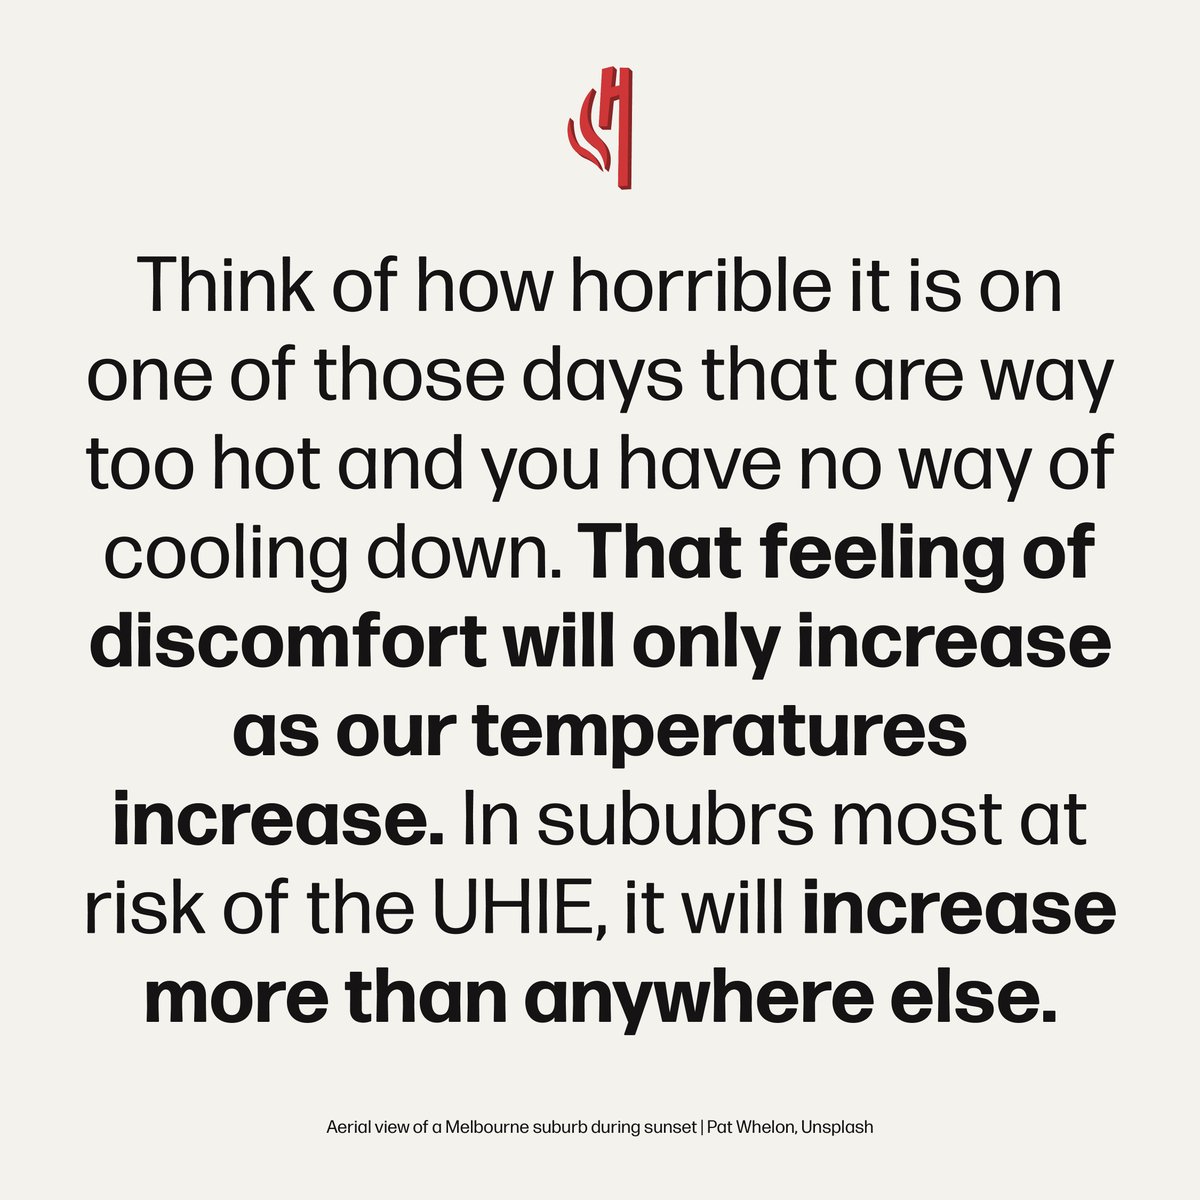 Feeling uncomfortable on a scorching day? 🌡️☀️

Brace yourself, it's only going to get hotter. In suburbs hit hardest by the Urban Heat Island Effect, the heat will be relentless. Stay cool, stay prepared! 

#HeatWave #UrbanHeatIsland #StayCool